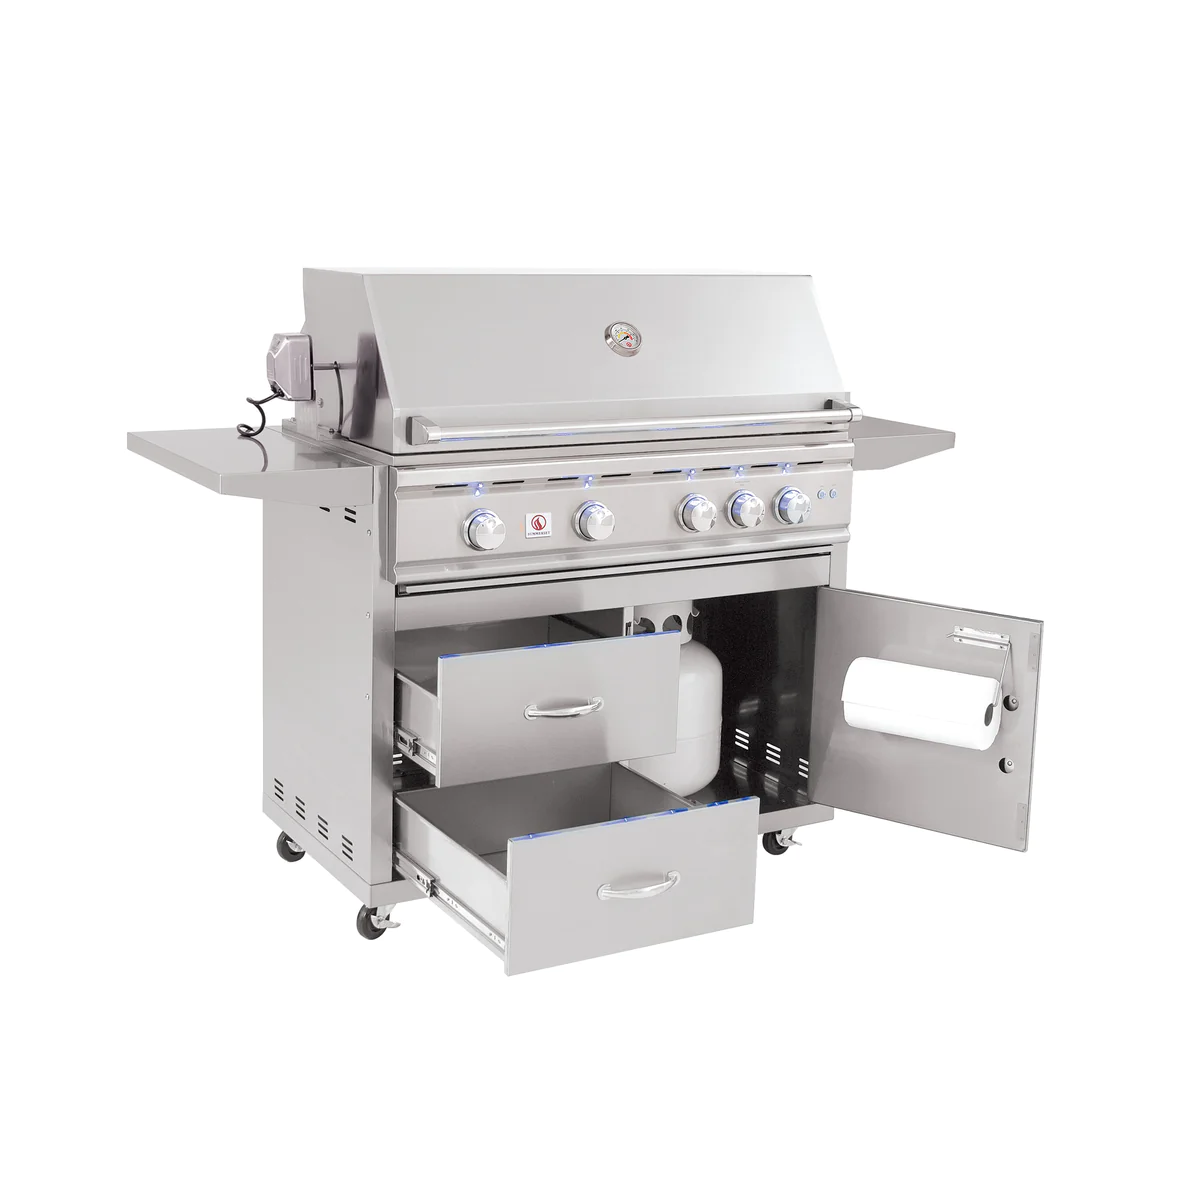 Summerset TRL Series 38 Inch Built-In Gas Grill - TRL38-NG